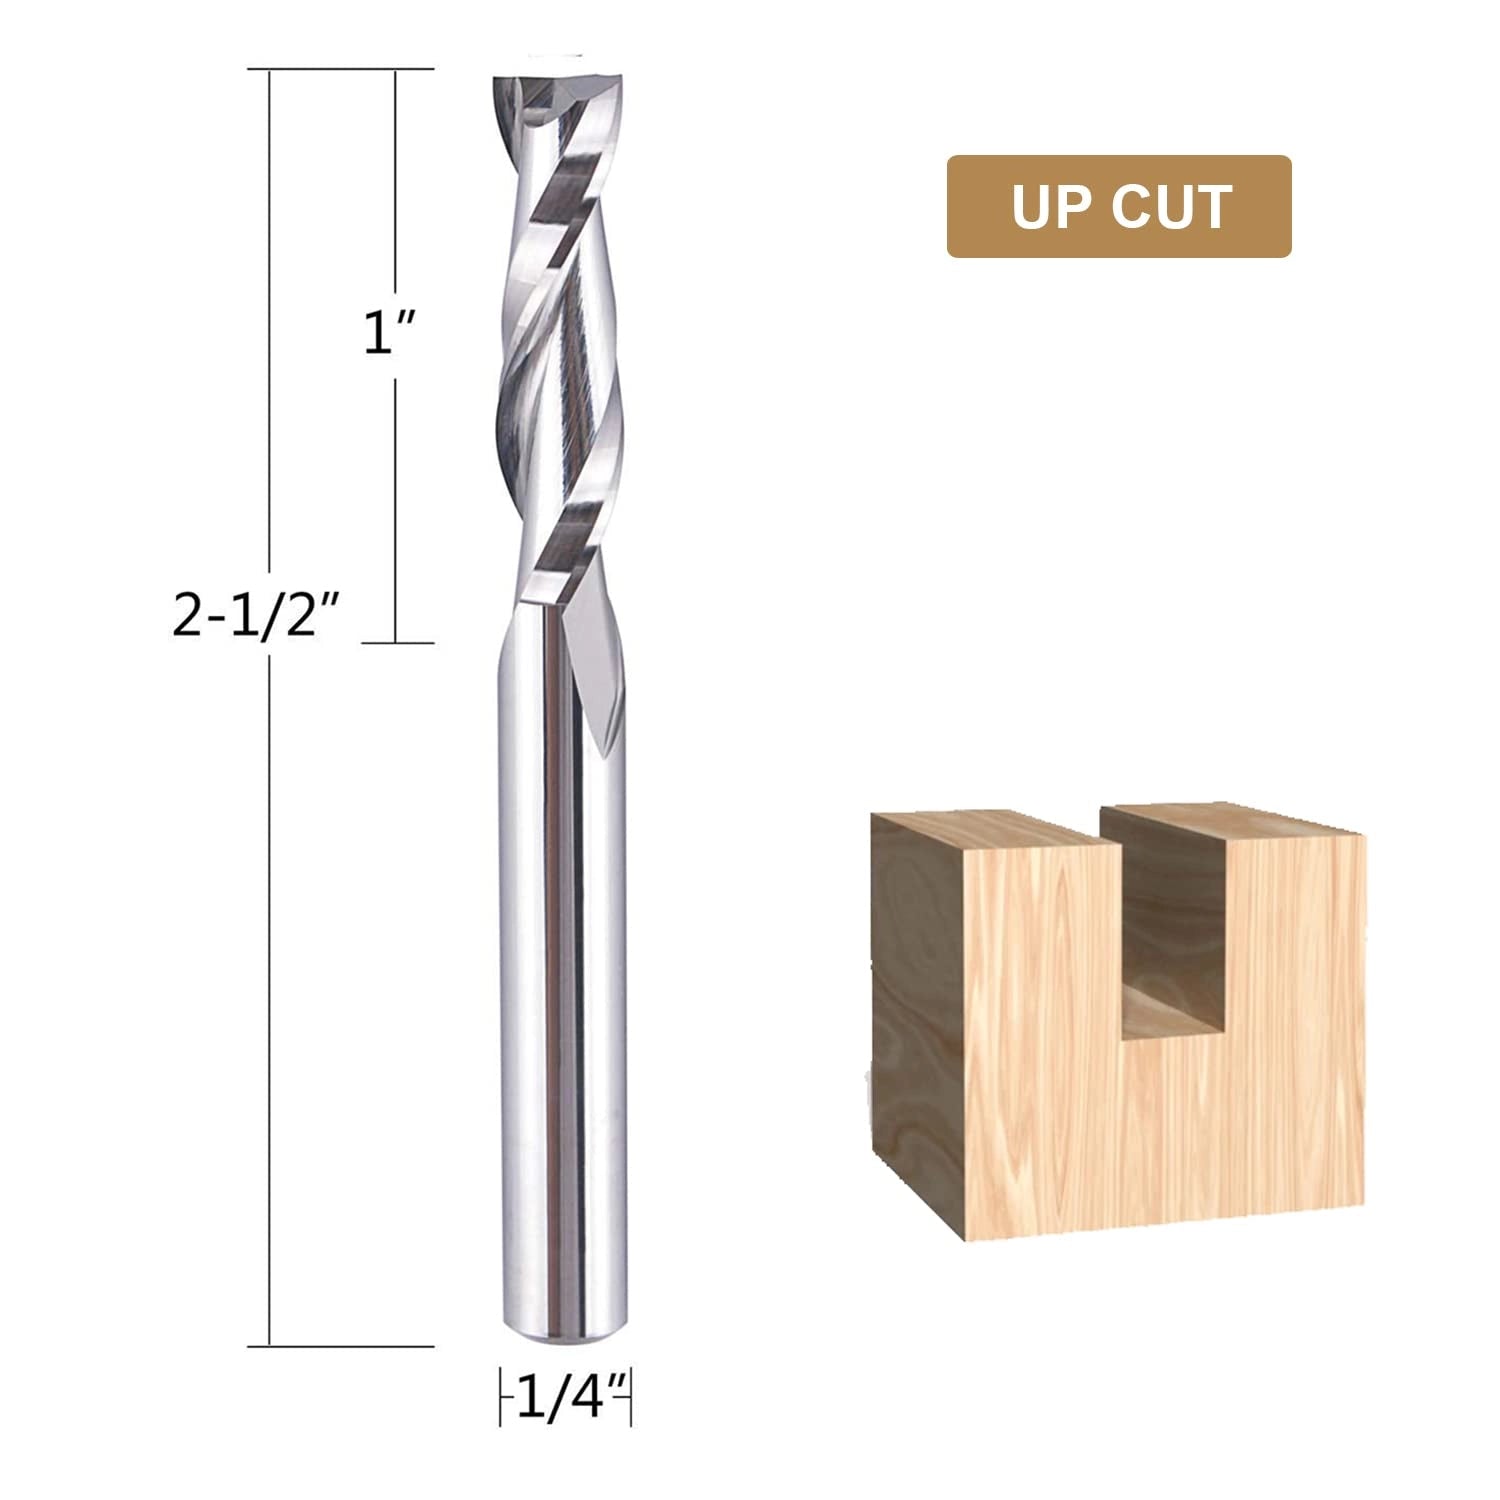 SpeTool 1/4 Diam Spiral SC Router Bits Up Cut End Mill for Woodworking